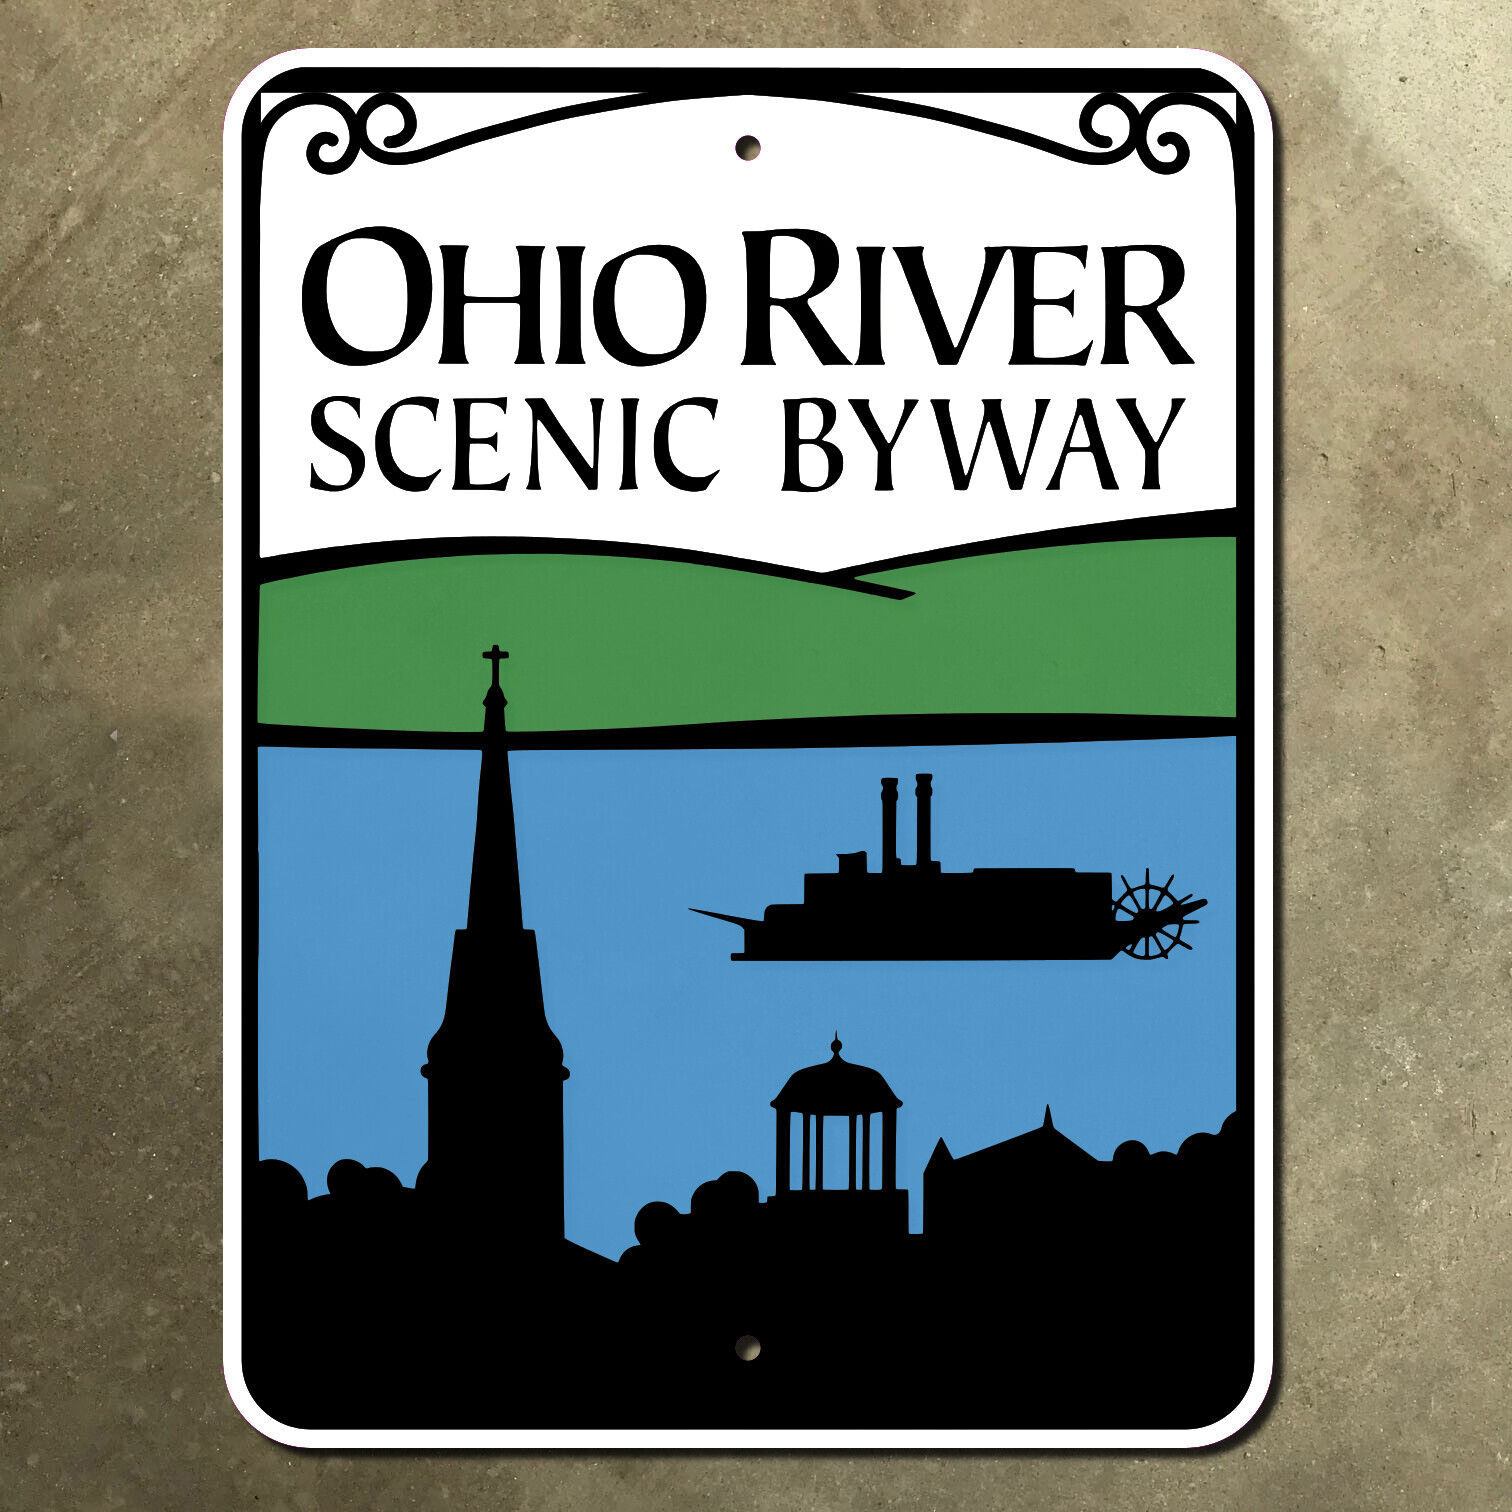 Ohio River Scenic Byway marker highway road sign 2006 Illinois Indiana 11x14